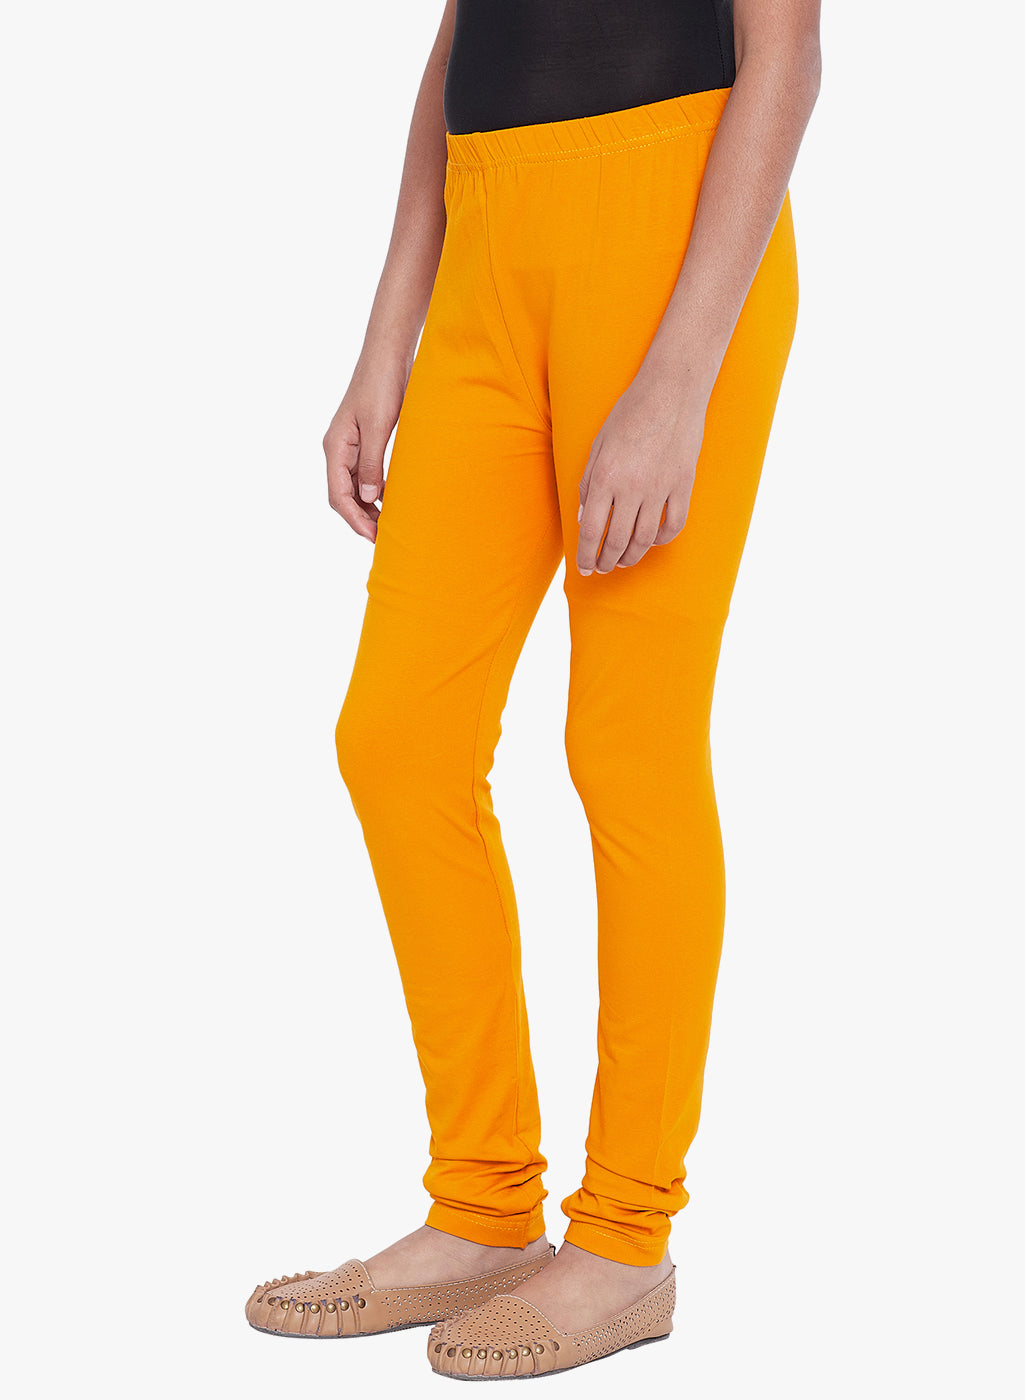 Buy Sand Grouse Women's Lemon Yellow Colour Cotton Solid Leggings at  Amazon.in